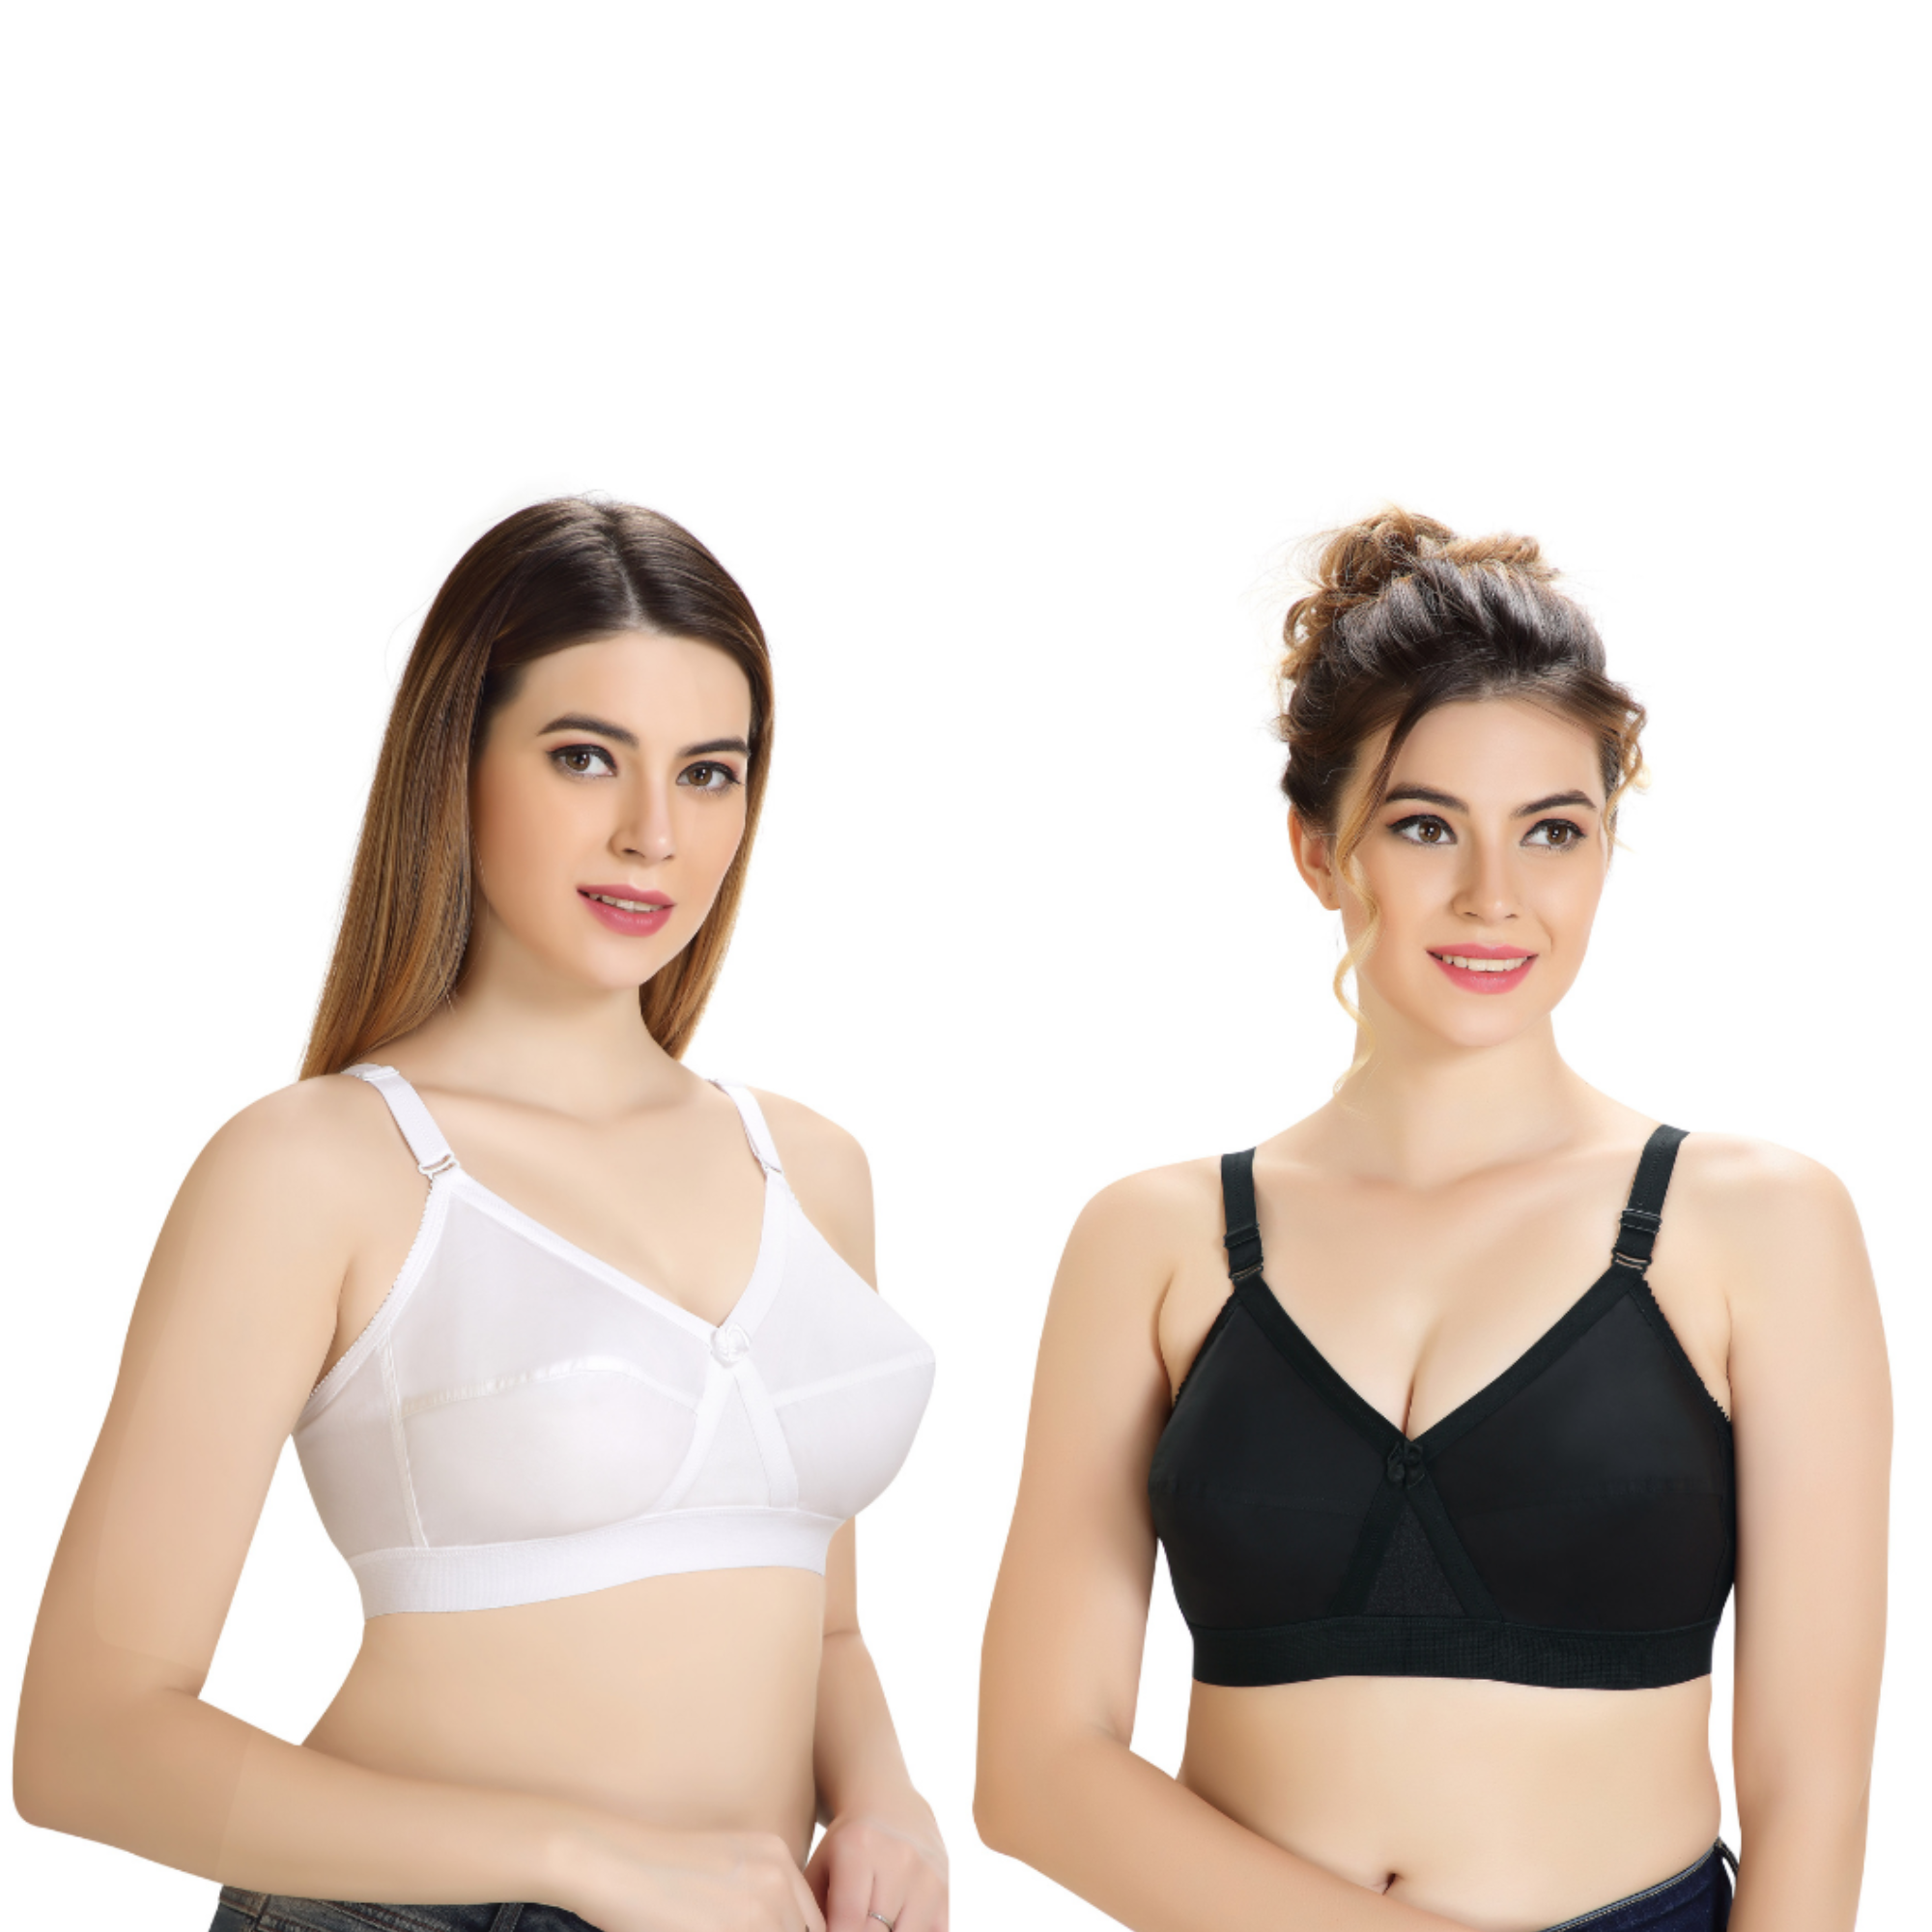 SONA Women's Cotton Non-Padded Wire Free Full Coverage Bra BABY-PINK 